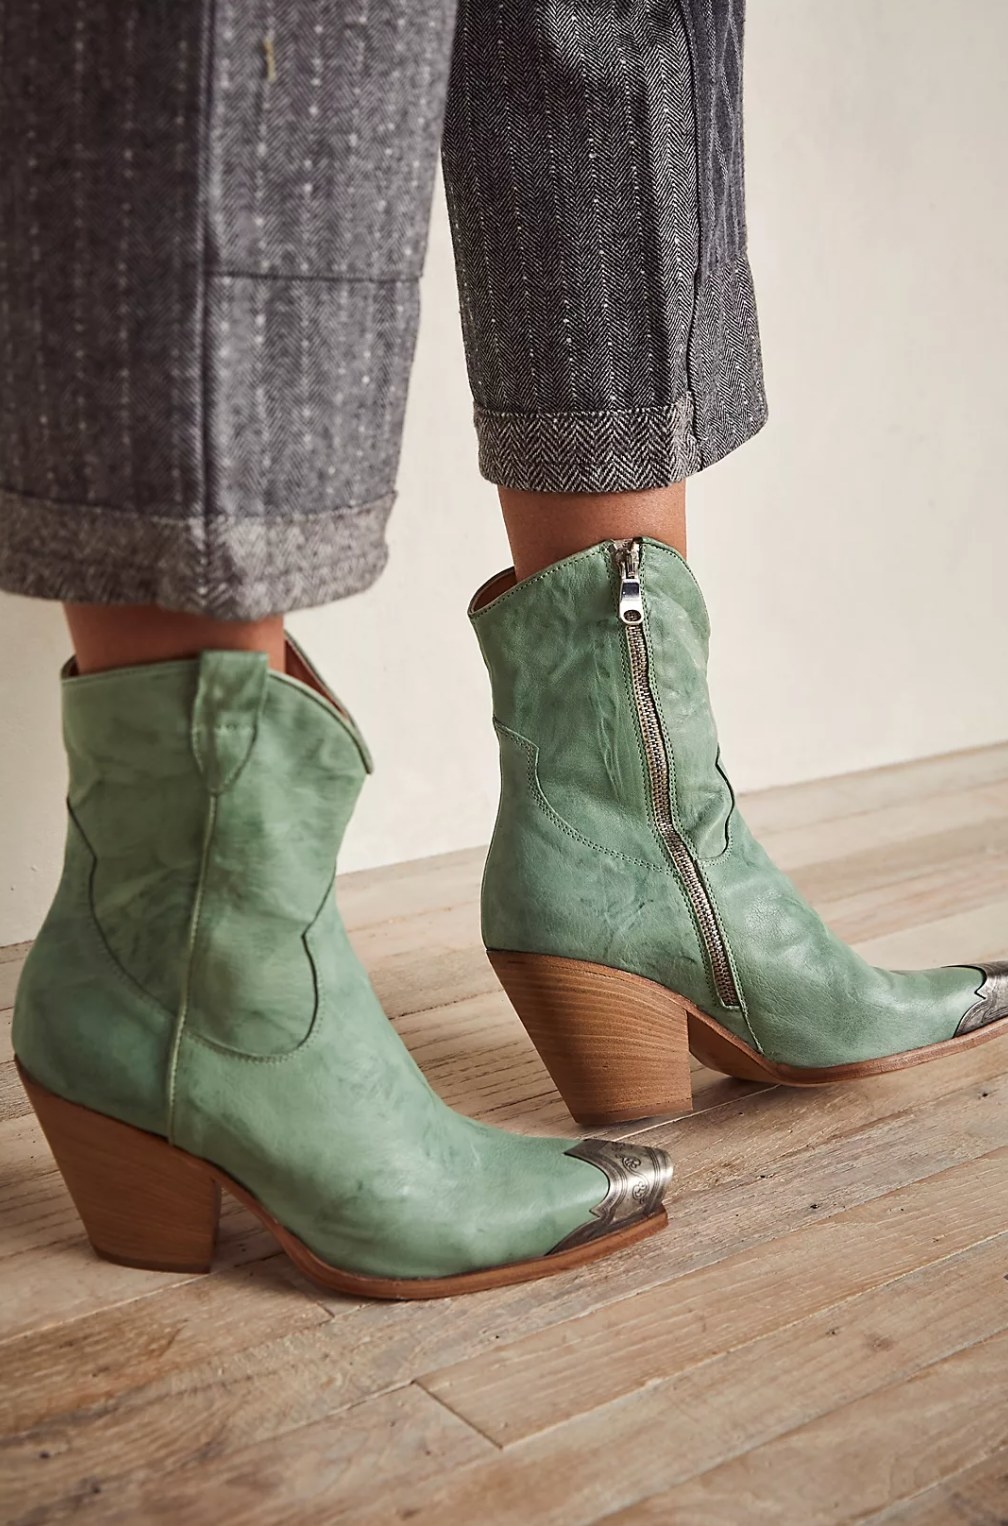 model wearing the green ankle-high cowboy boots with gray pants